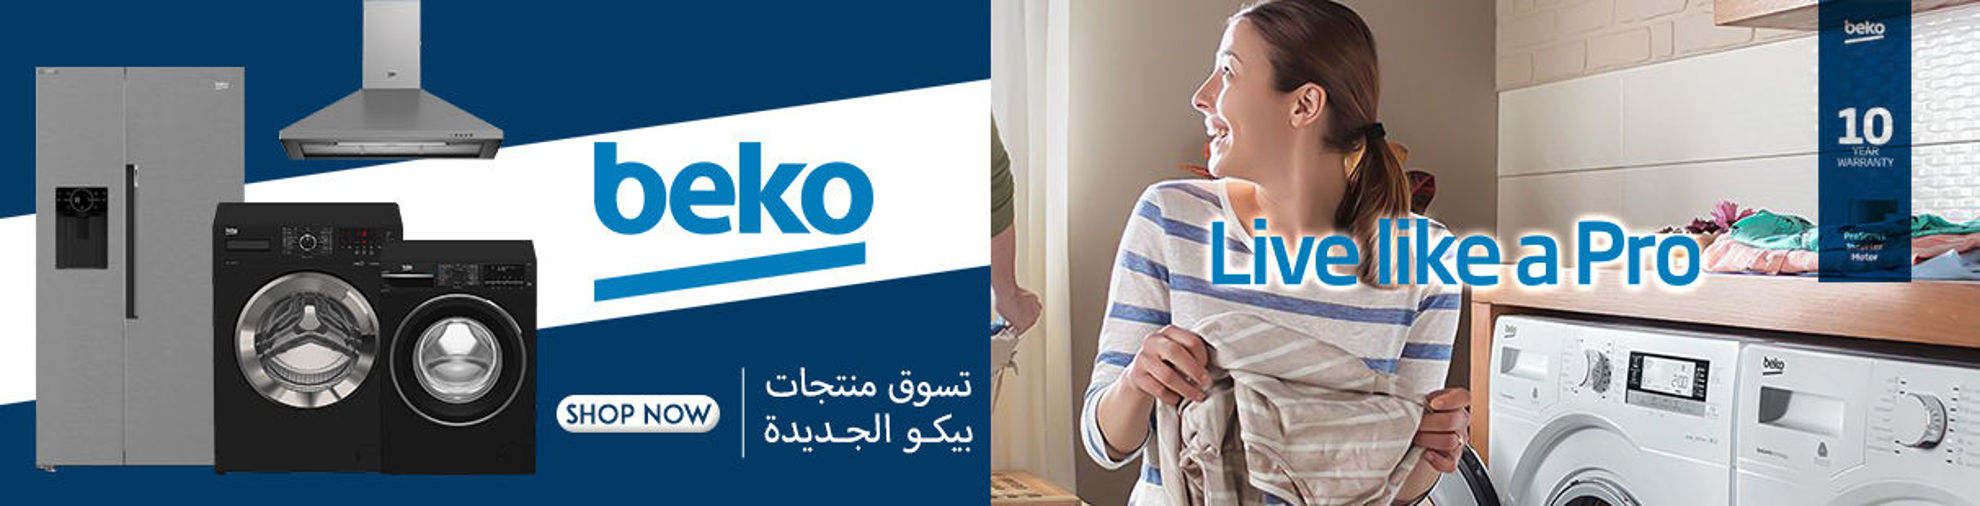 Beko New Products